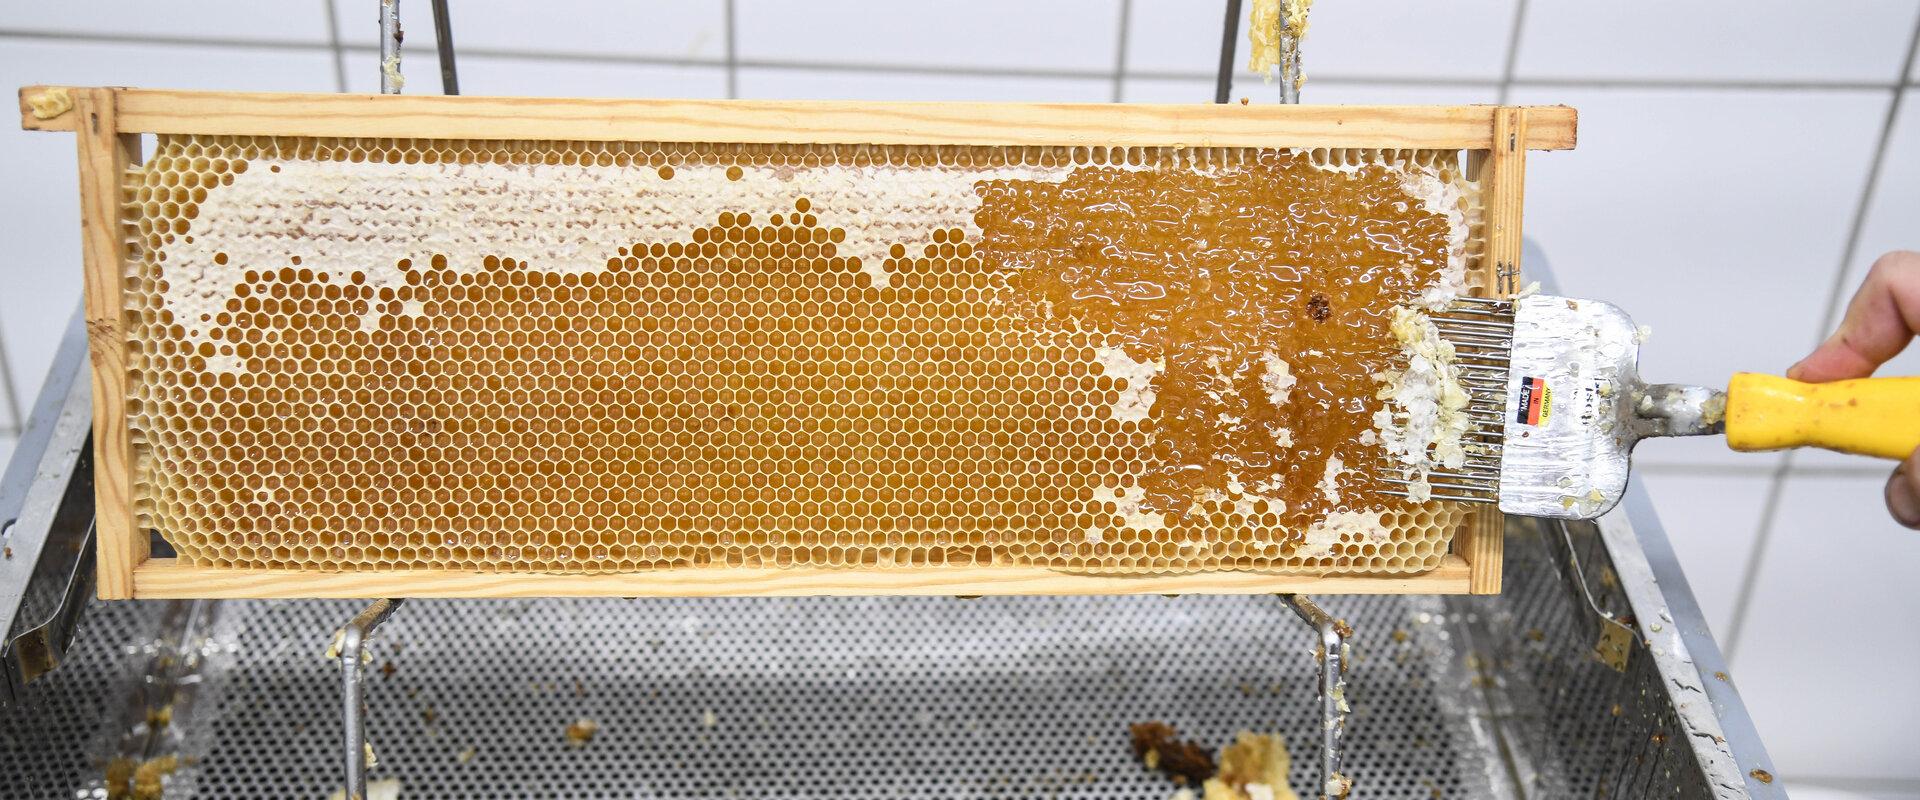 Removing seals from the honey combs in the Aeglane Hetk apiary